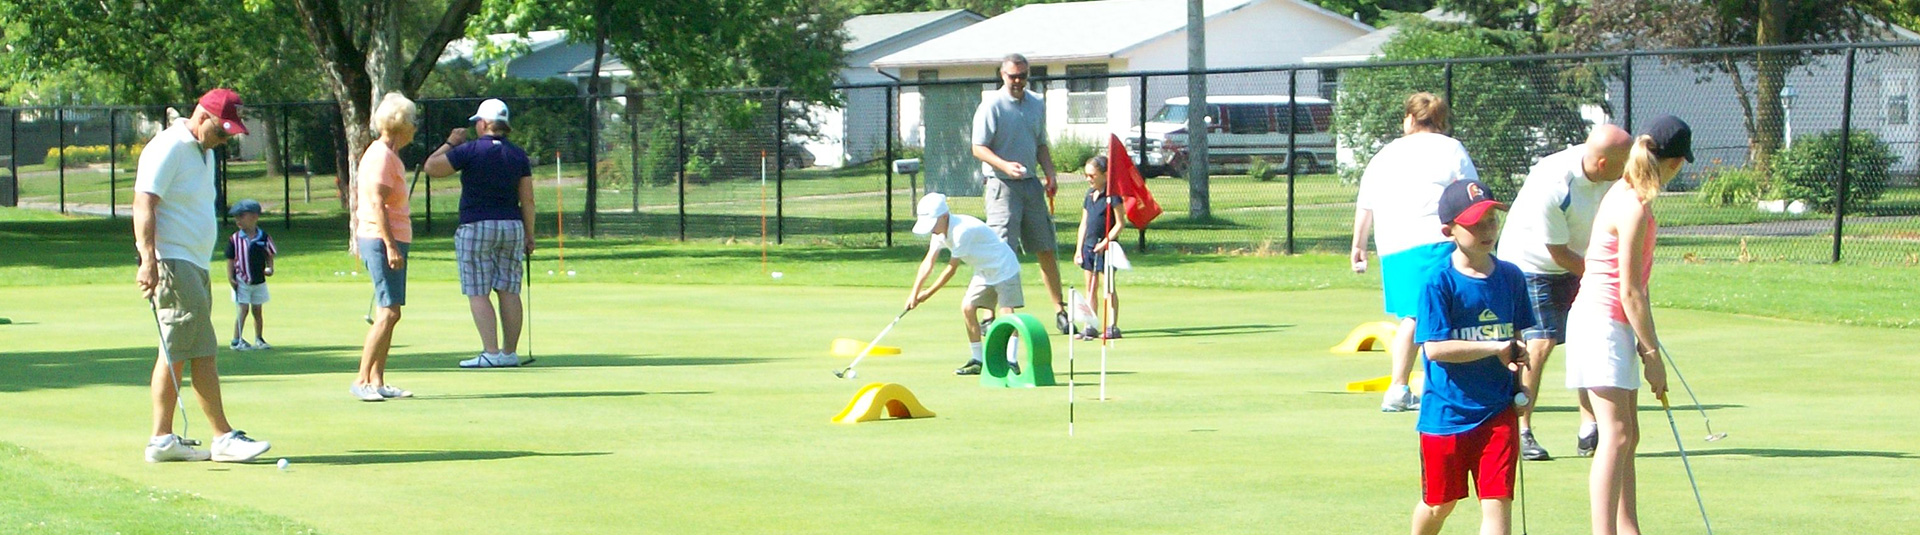 Kids and adults playing golf